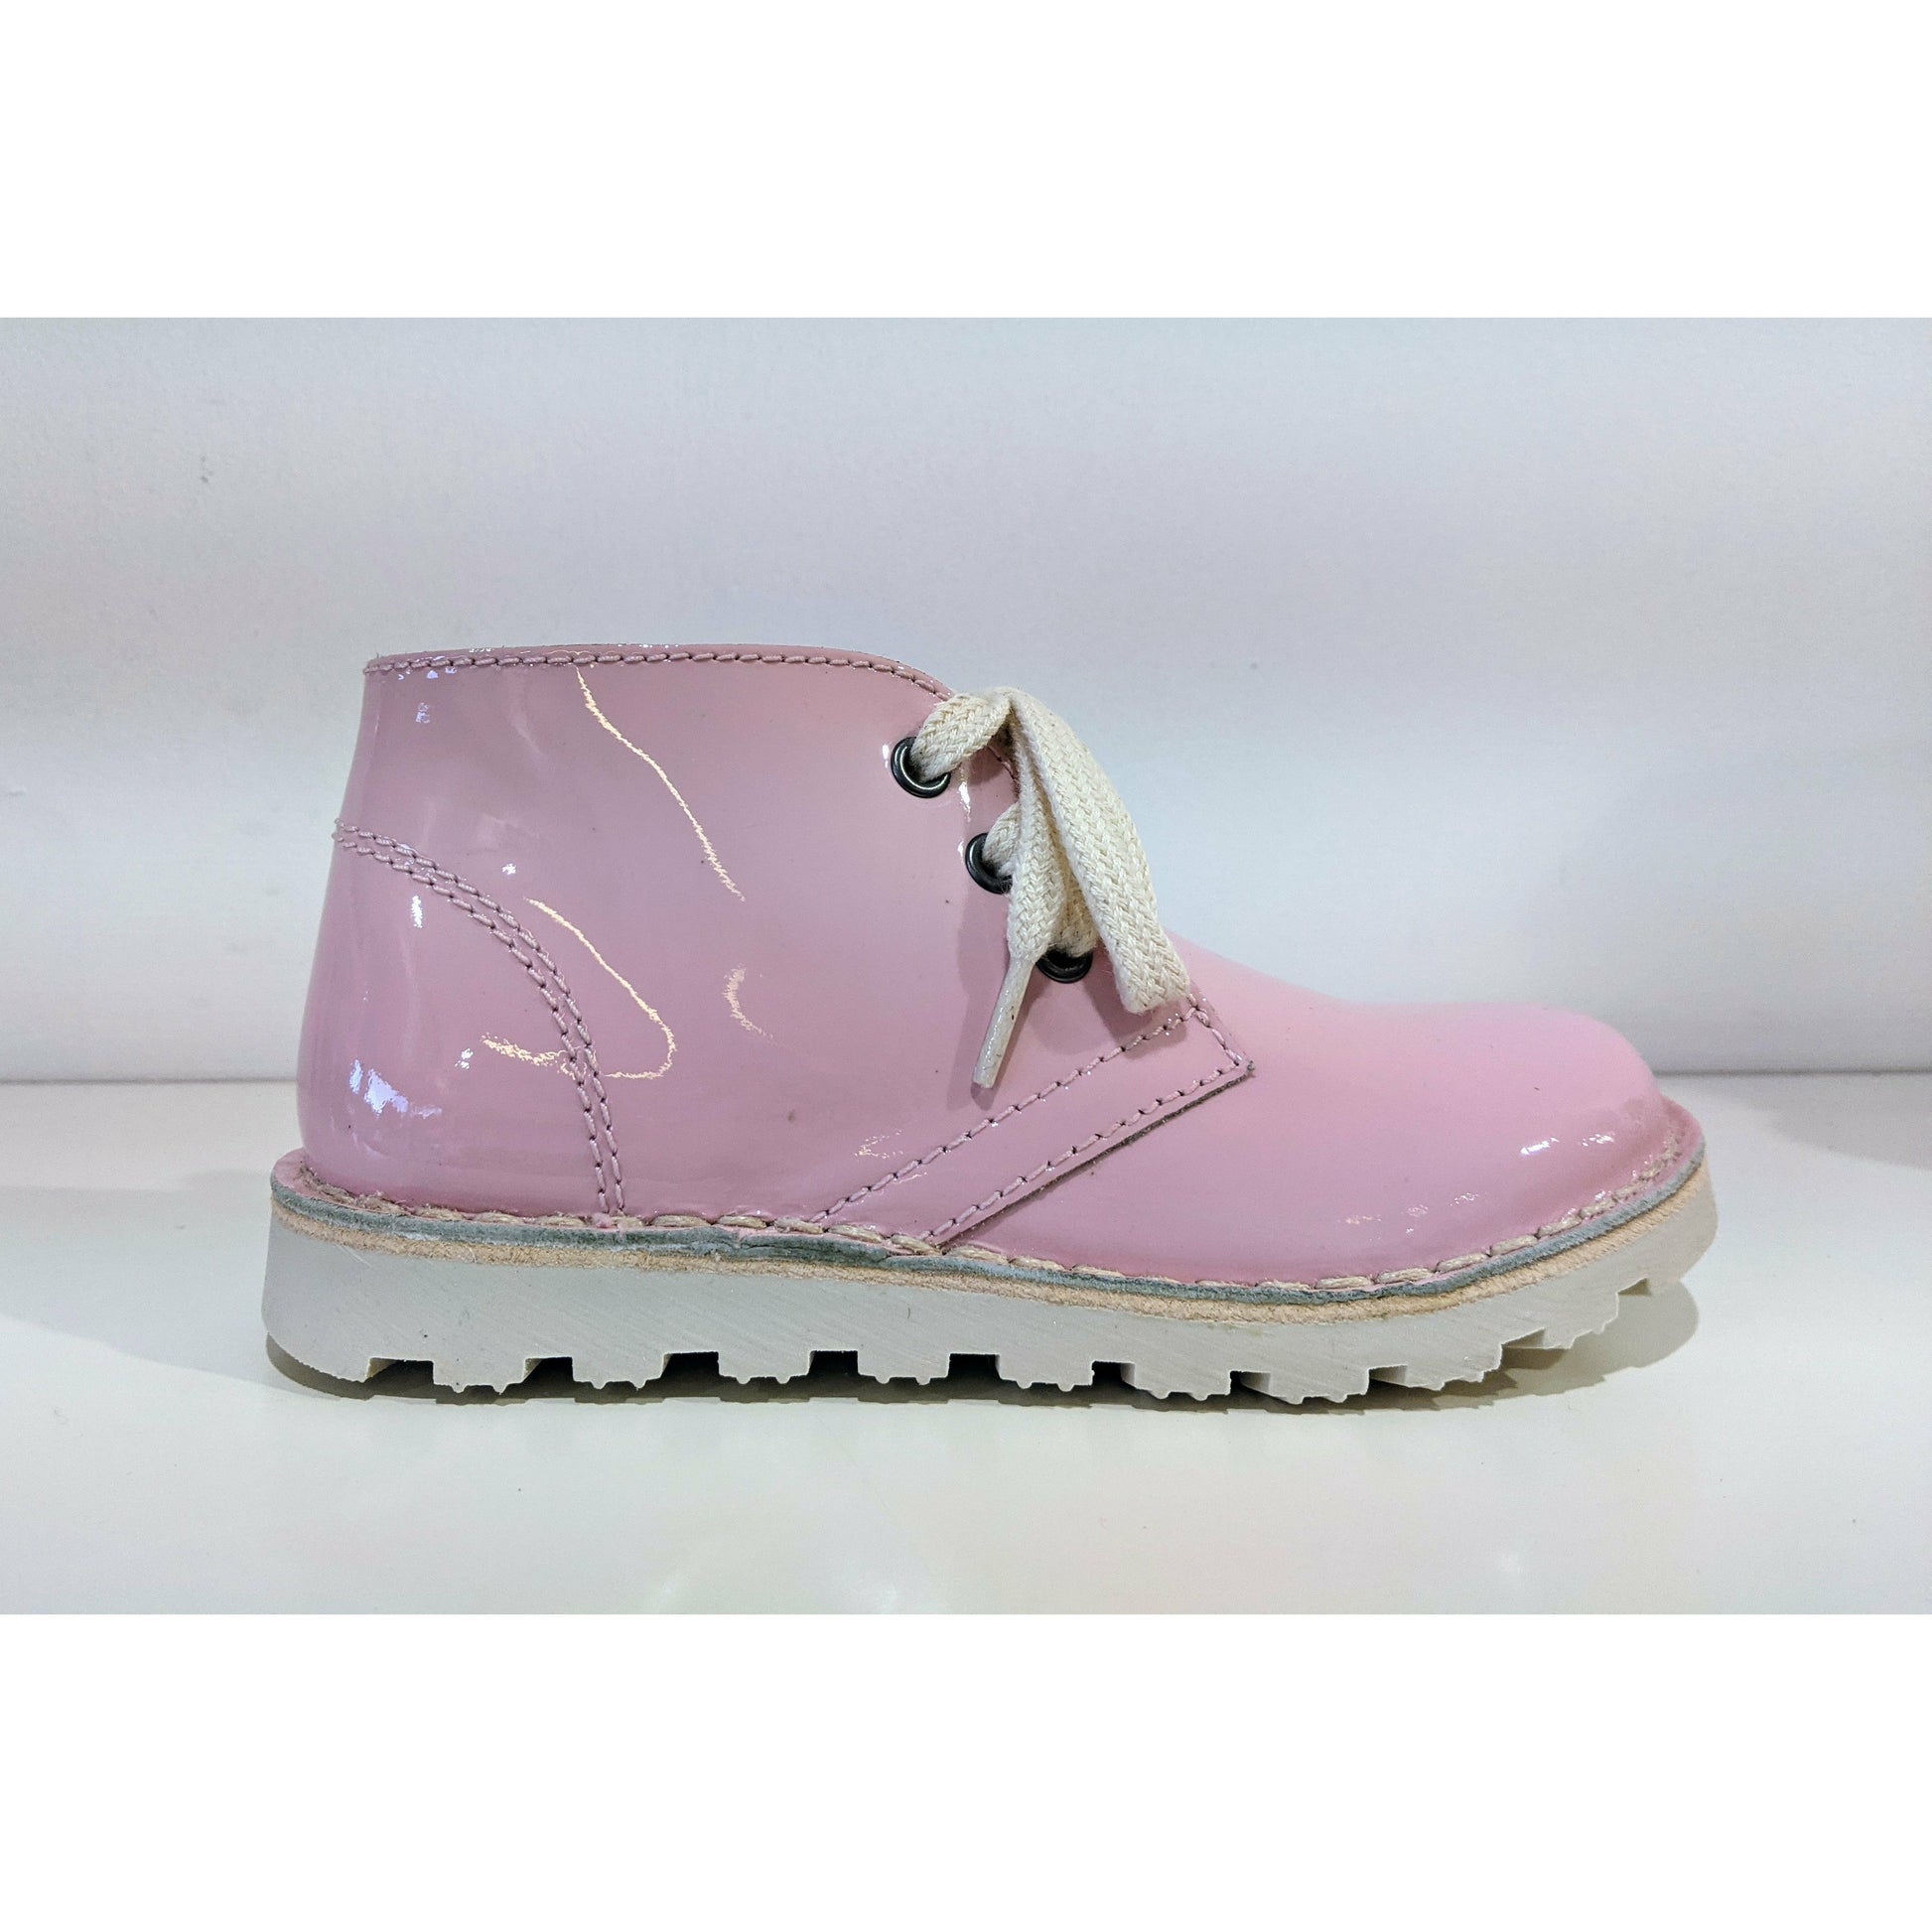 A girls ankle boot by Petasil, style Kip, in pink with lace up fastening. Right side view.